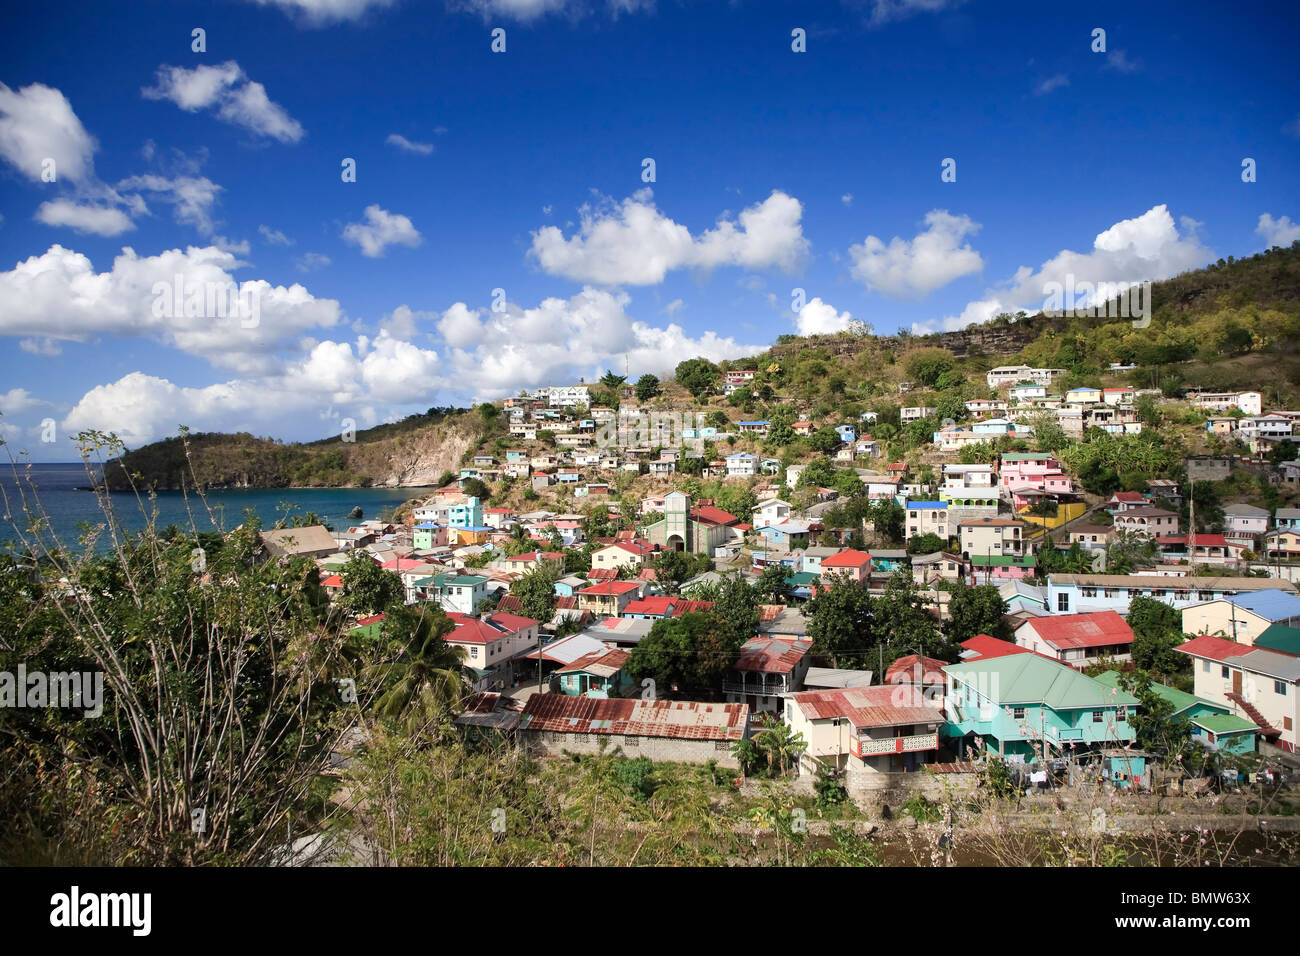 Caribbean, St Lucia, Canaries Village Stock Photo